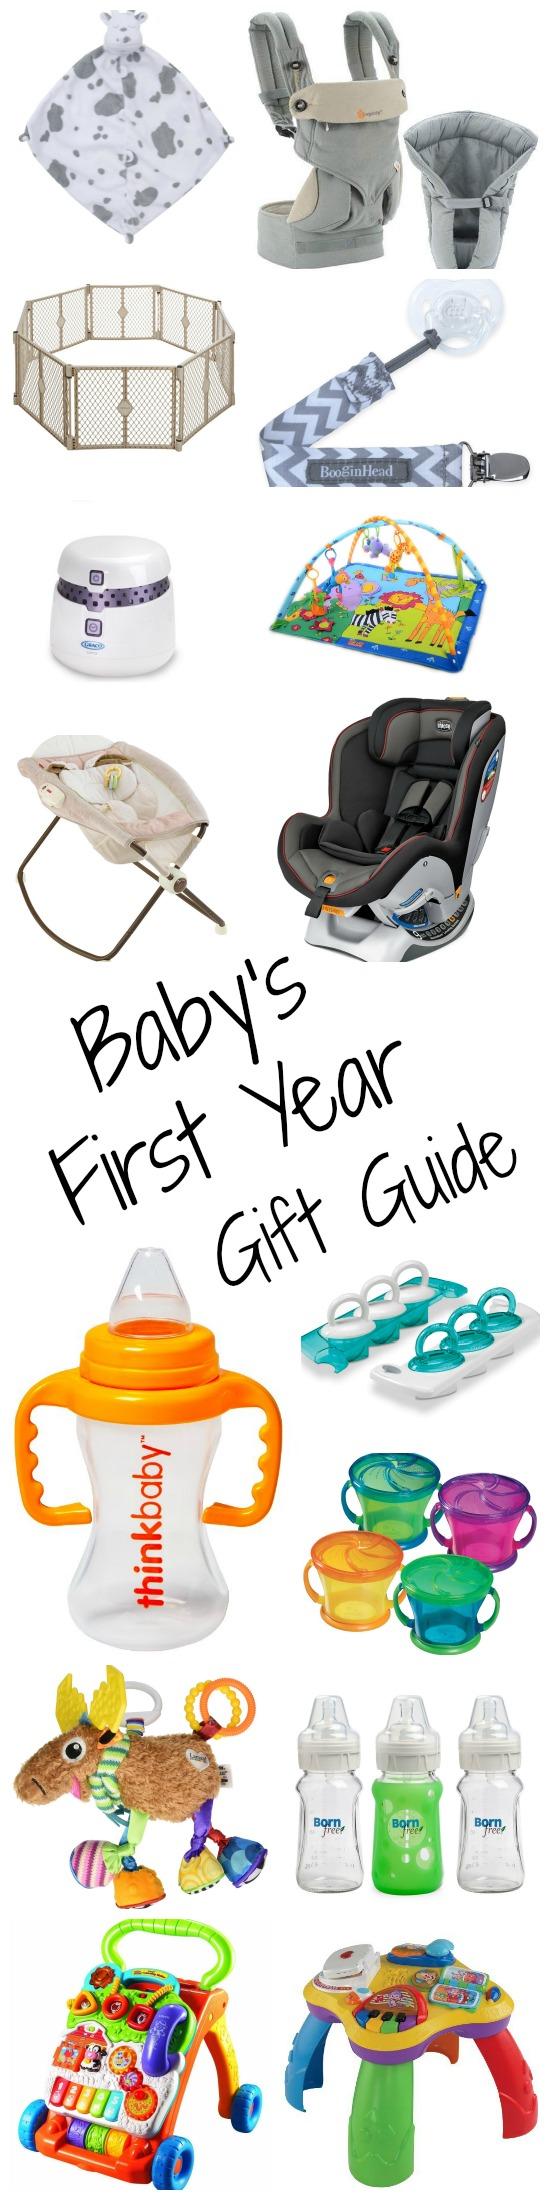 A roundup of gift ideas for pregnant women, new moms and dads and babies. Full of items we all loved during baby's first year!